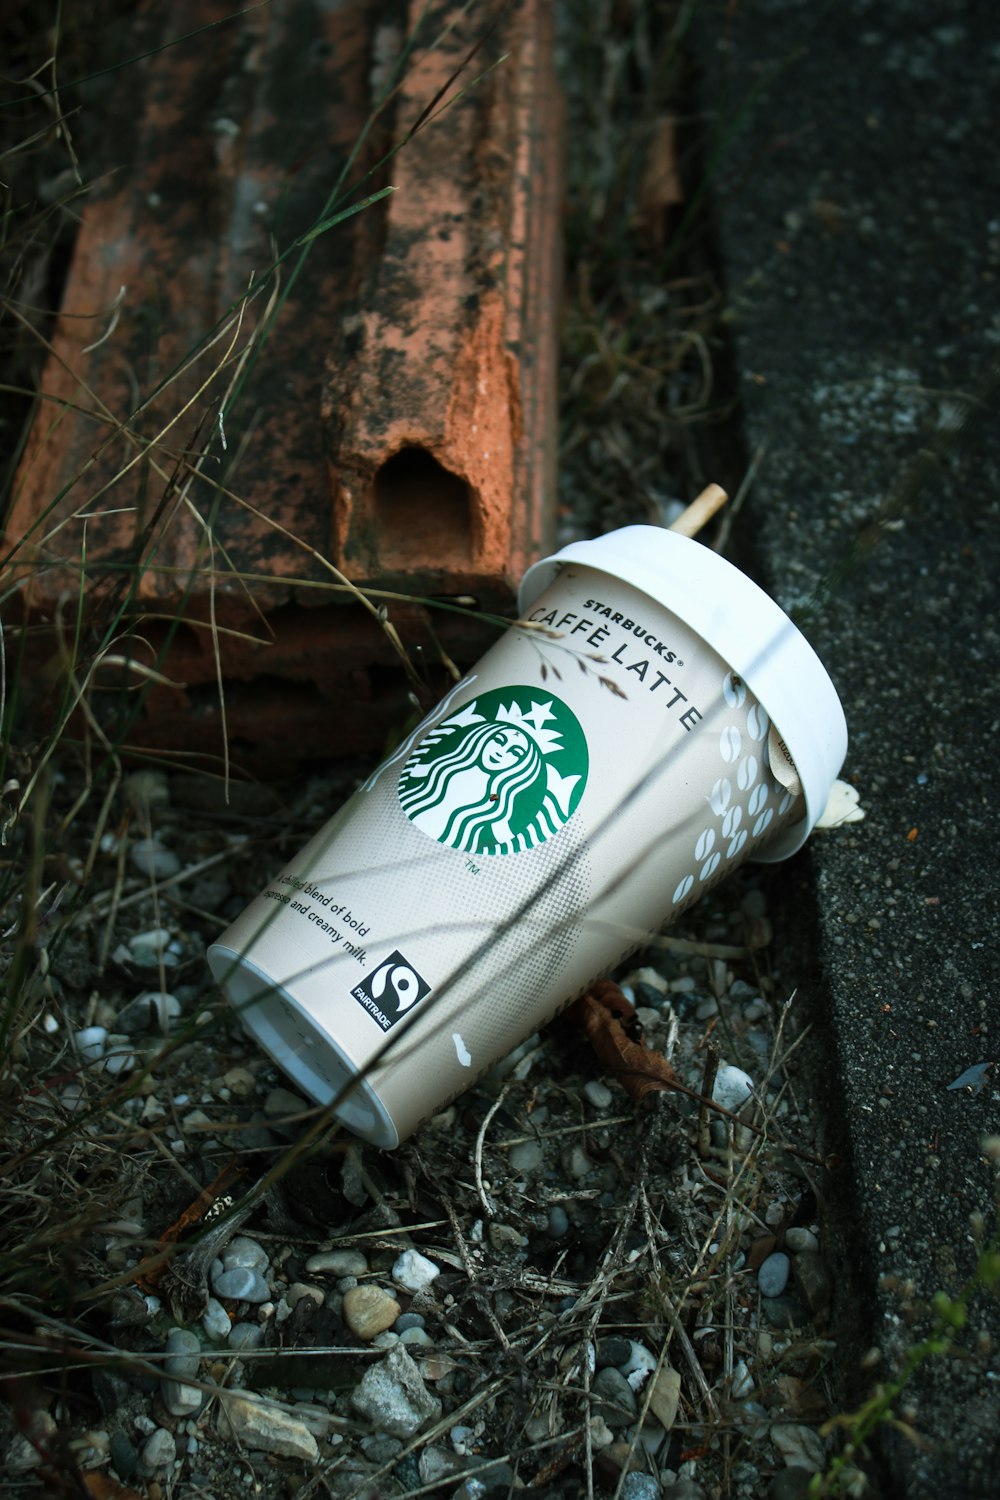 a starbucks cup sitting on the ground next to a piece of wood